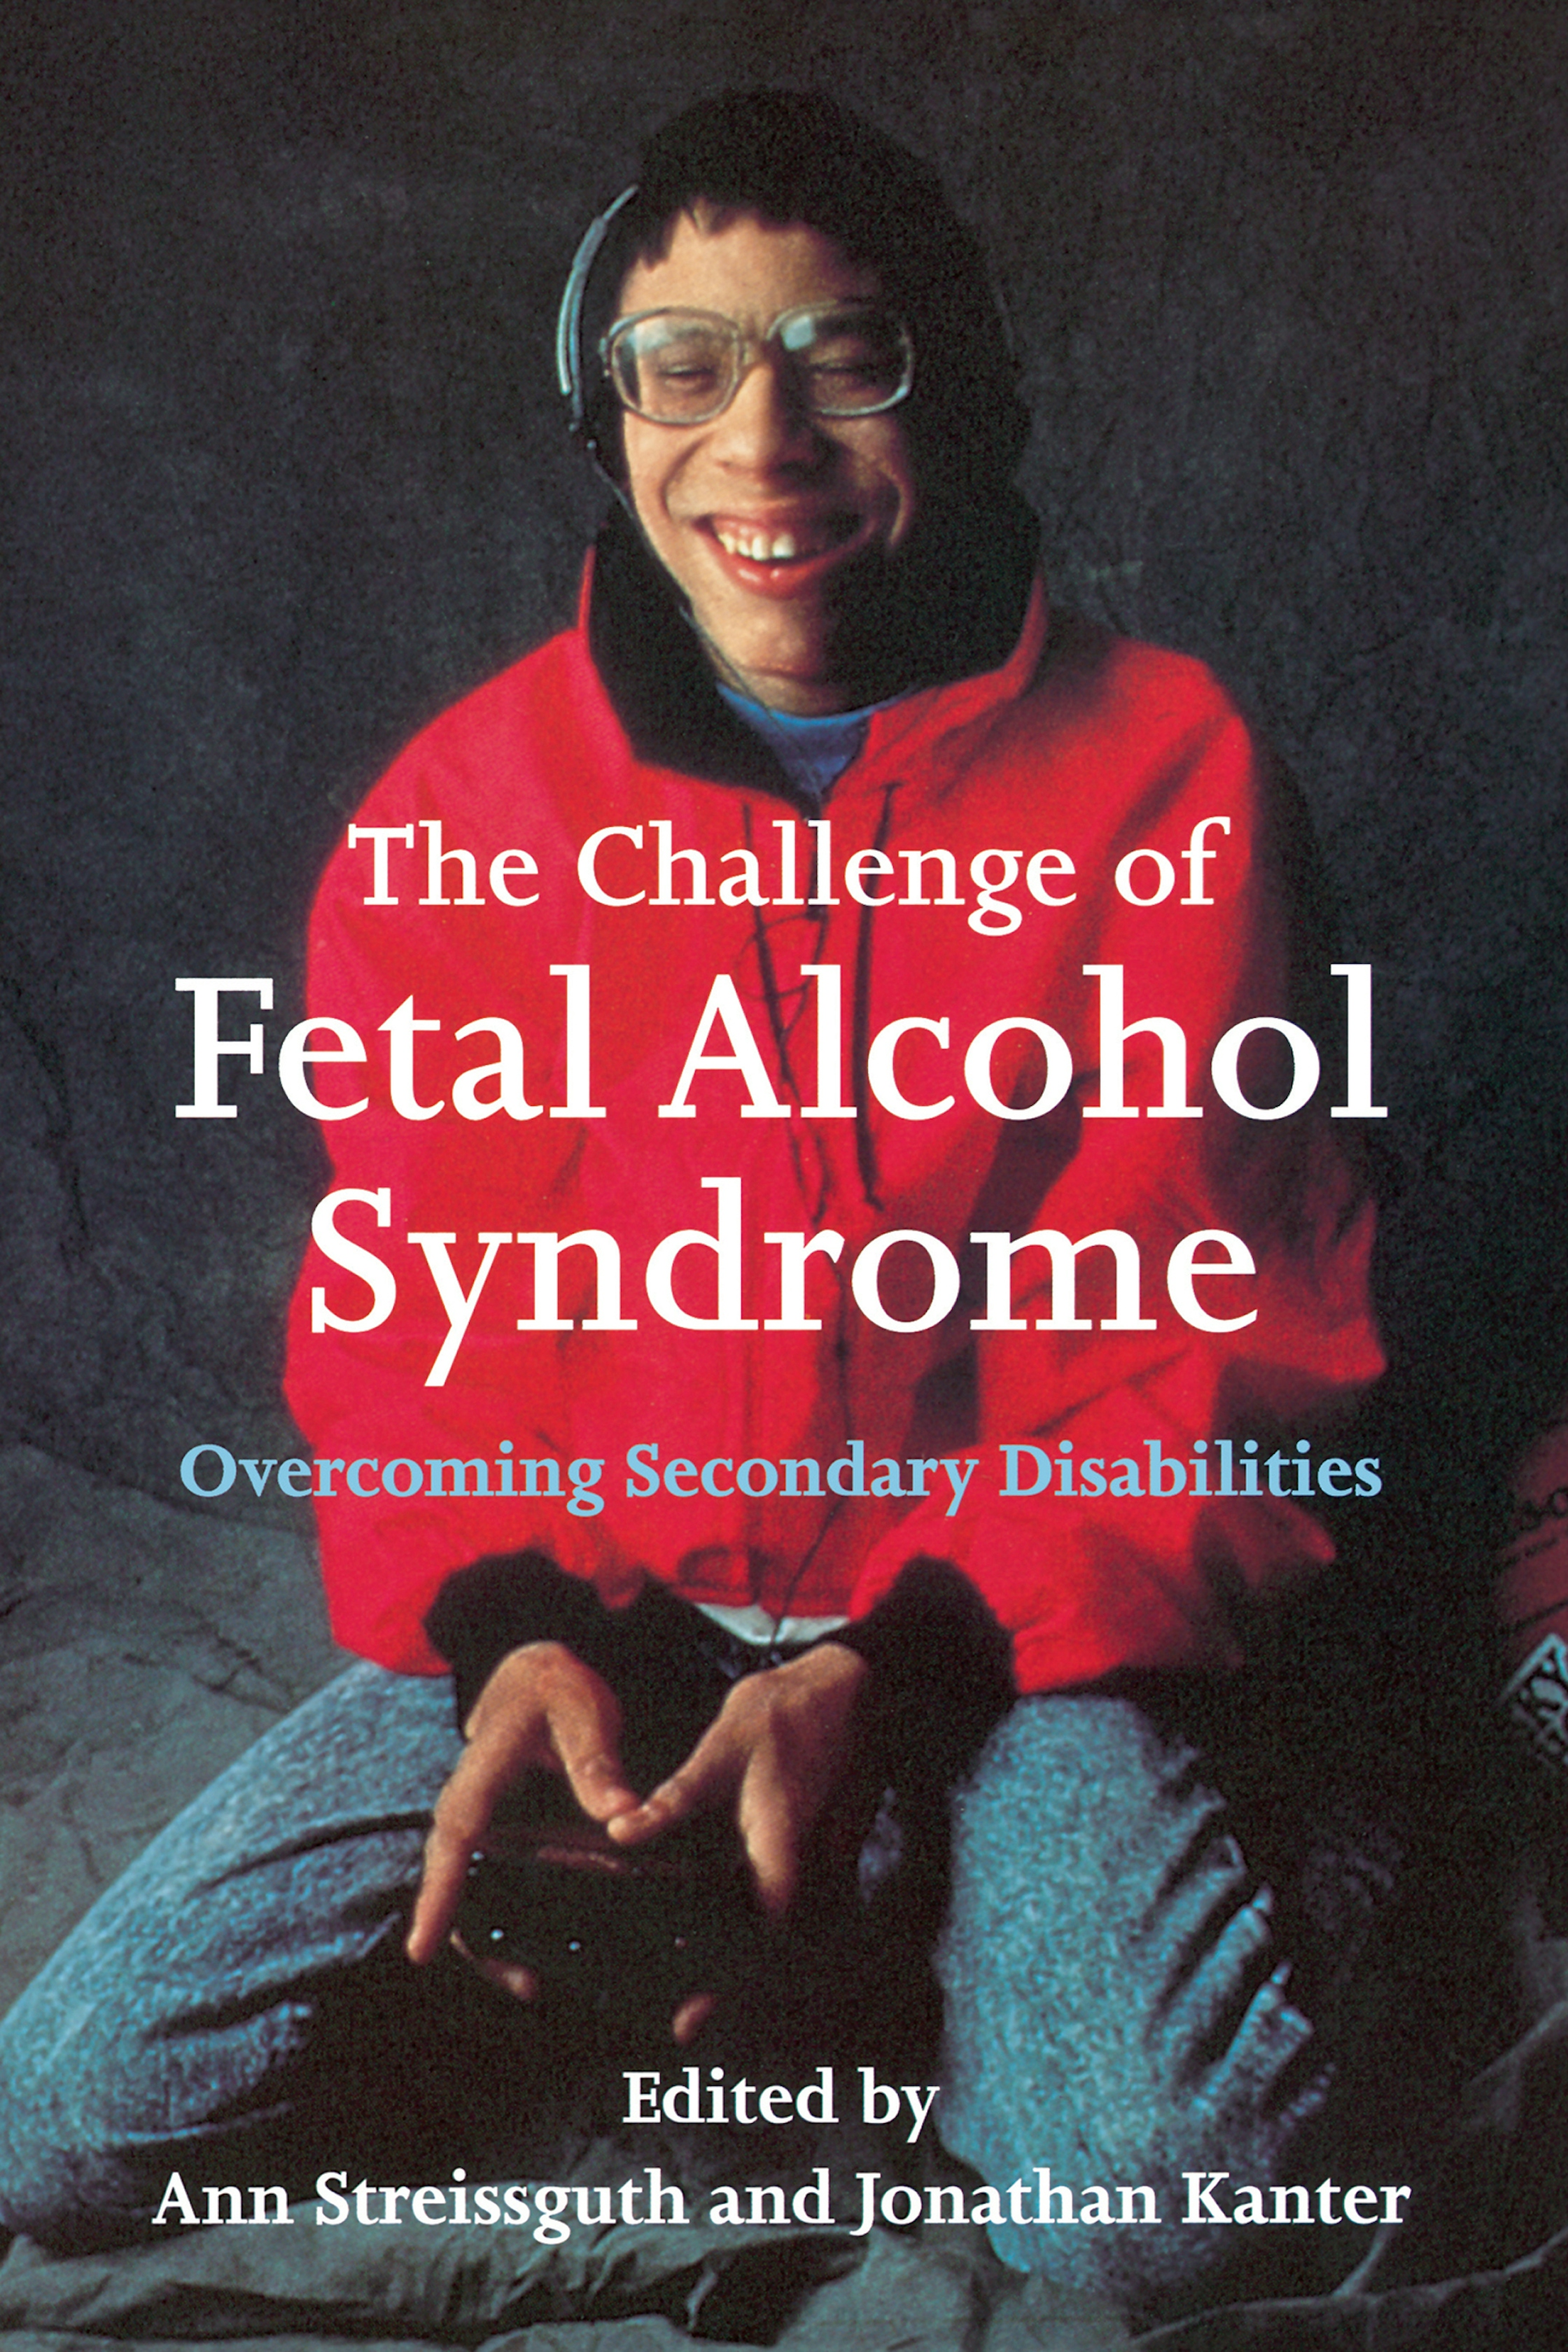 The Challenge of Fetal Alcohol Syndrome